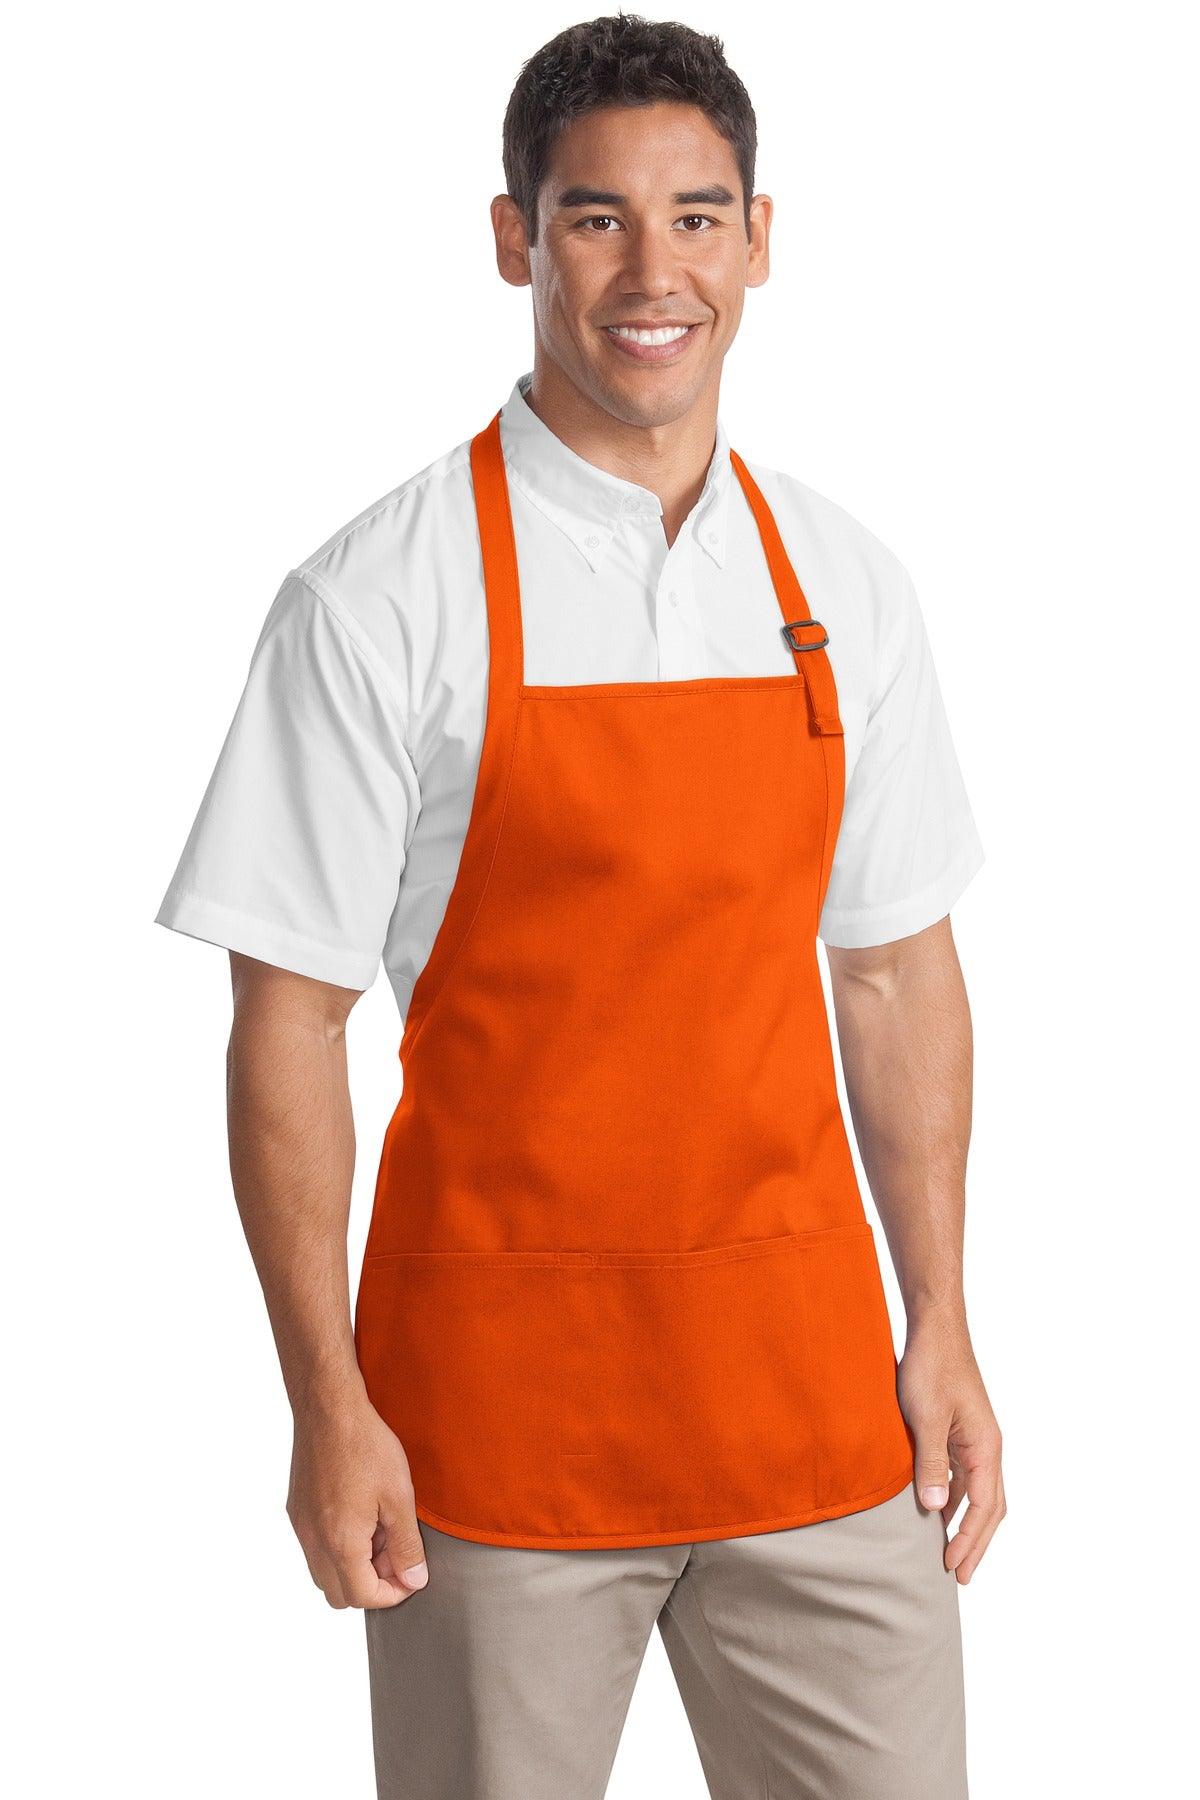 Port Authority Medium-Length Apron with Pouch Pockets. A510 - Dresses Max